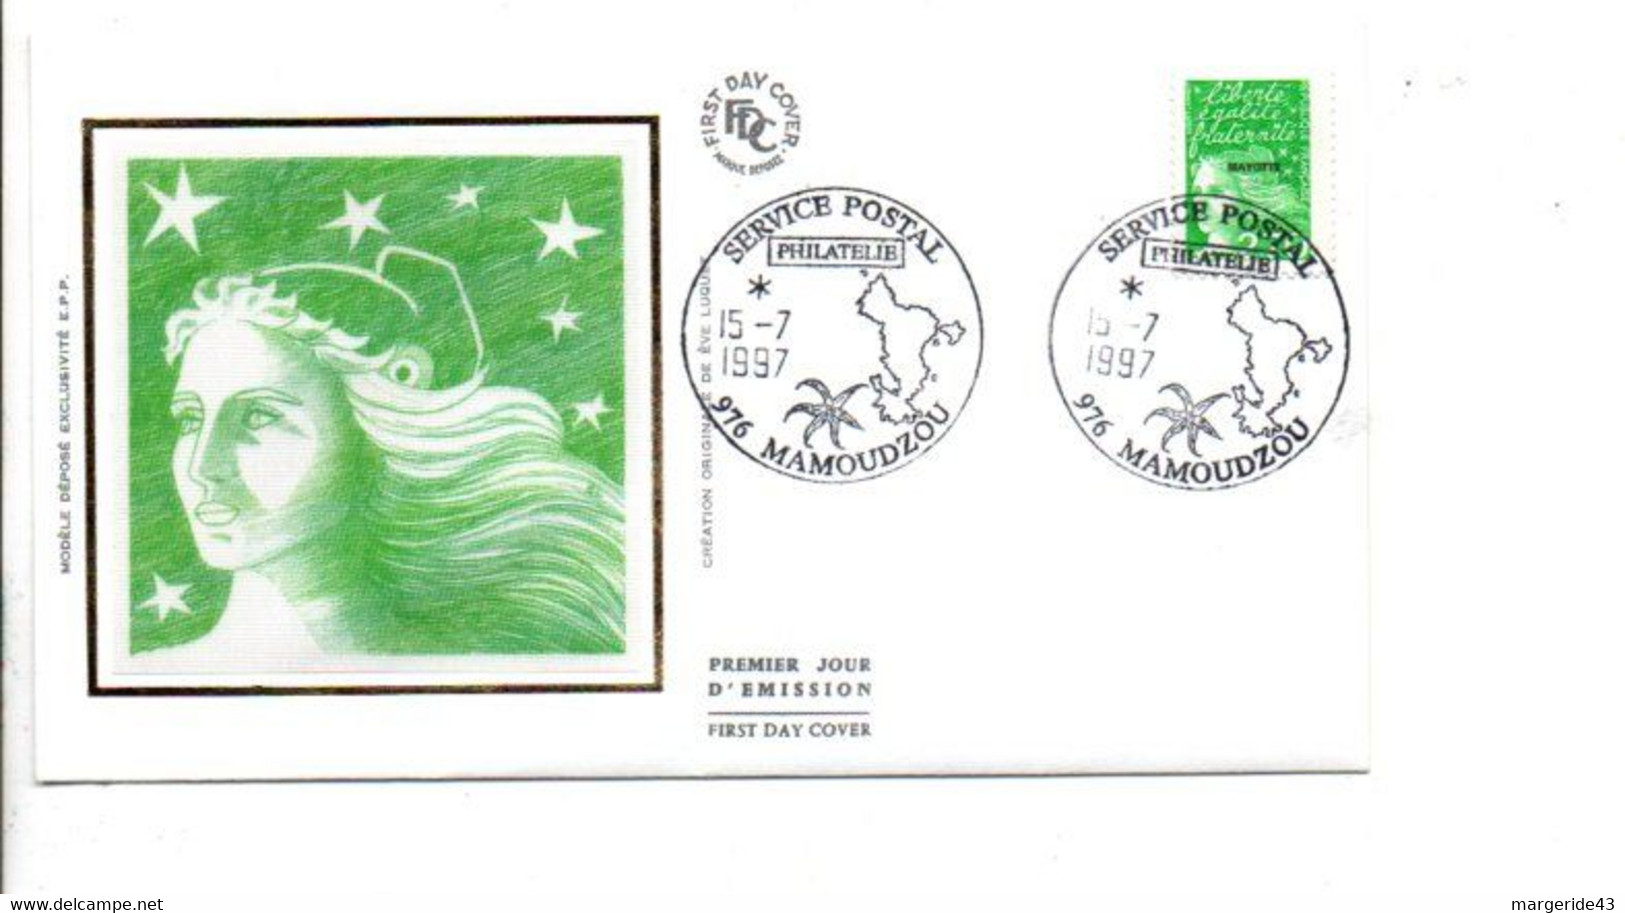 MAYOTTE FDC 1997 MARIANNE DE LUQUET 2.70 - Covers & Documents